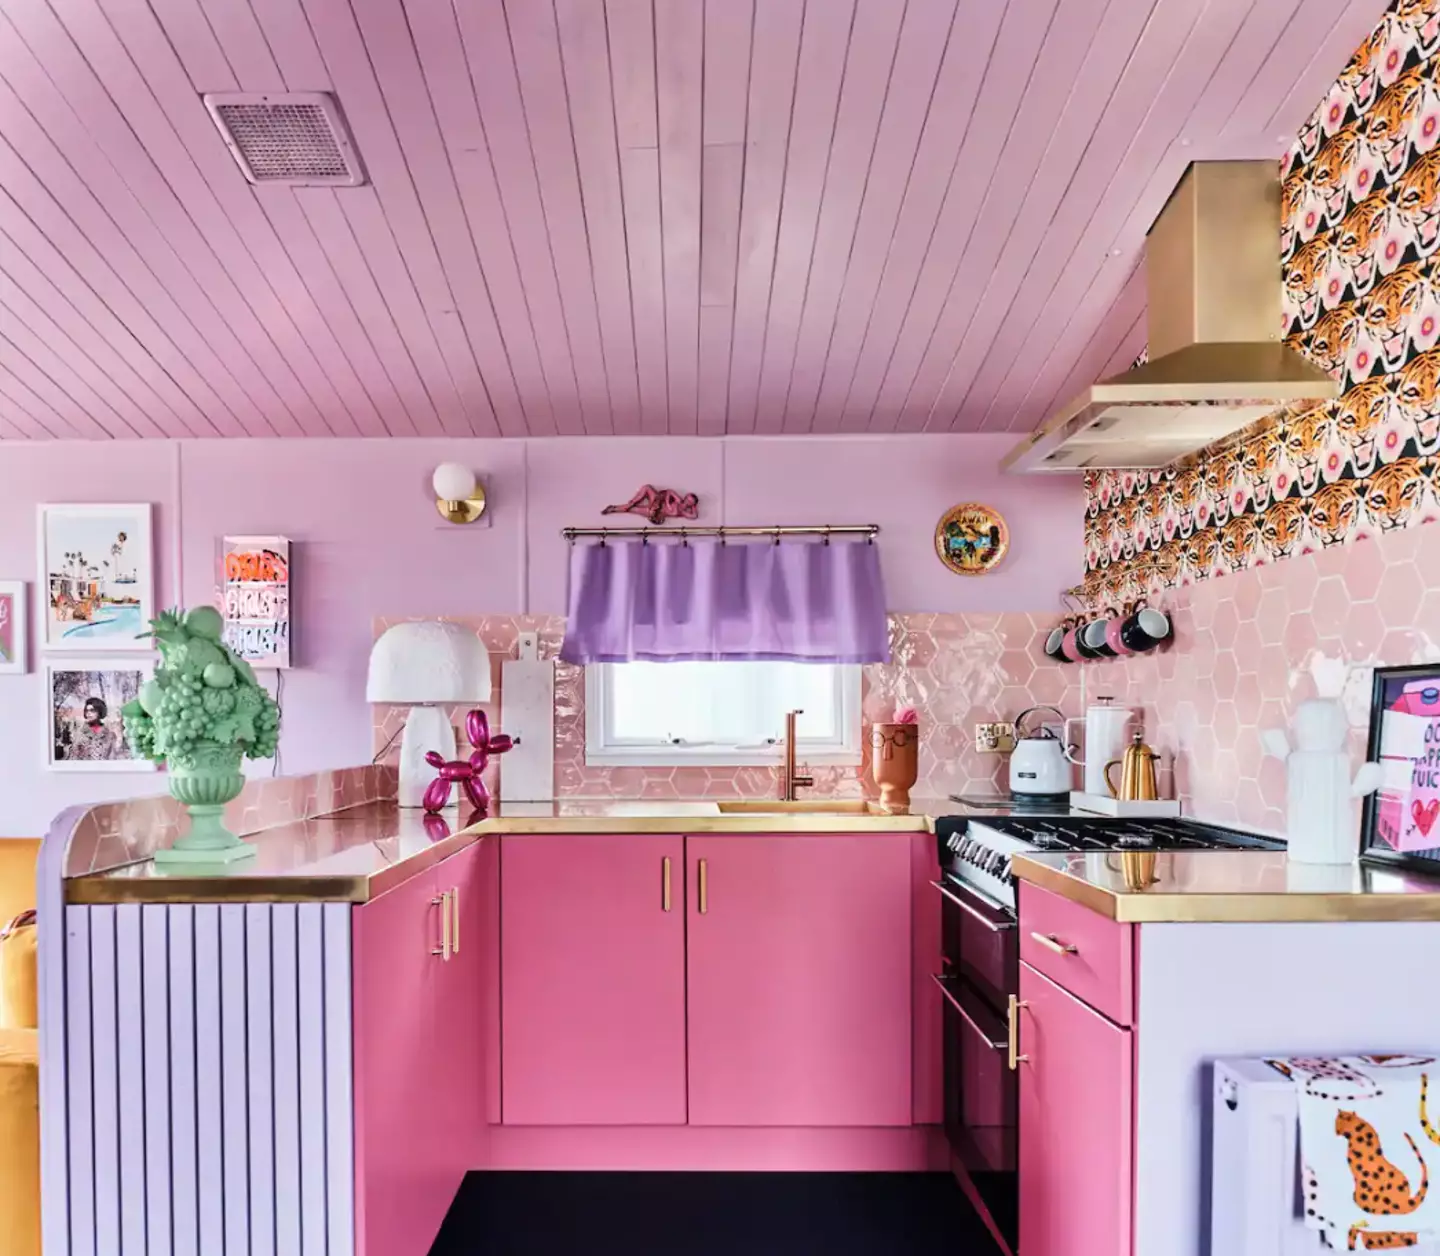 Live out your Barbie fantasies in this pink kitchen.